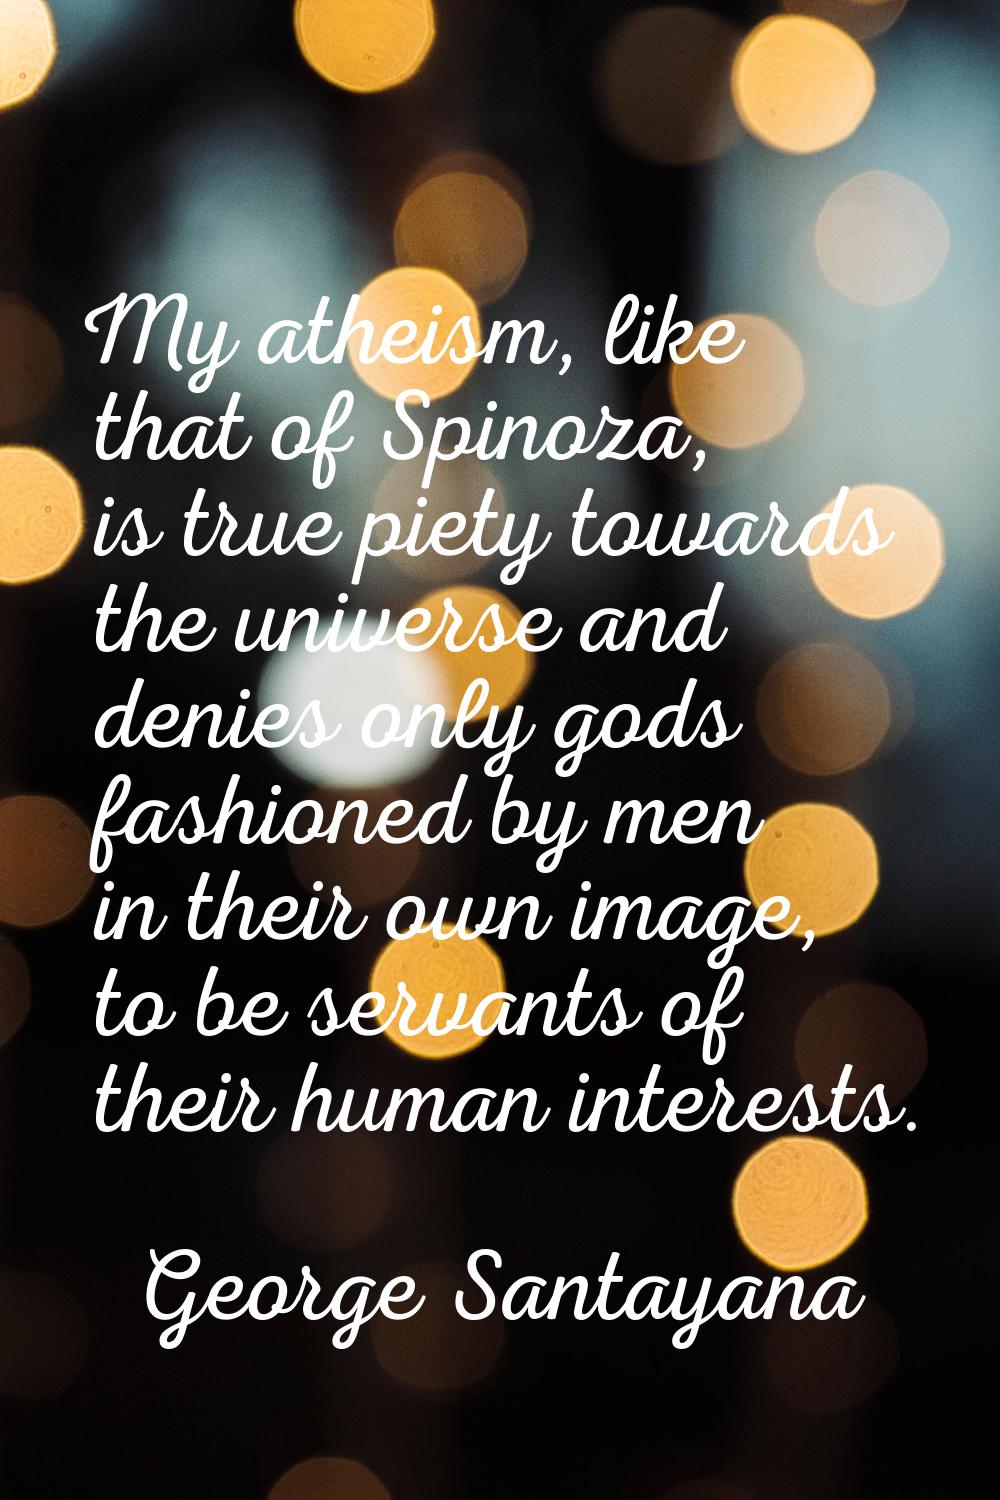 My atheism, like that of Spinoza, is true piety towards the universe and denies only gods fashioned